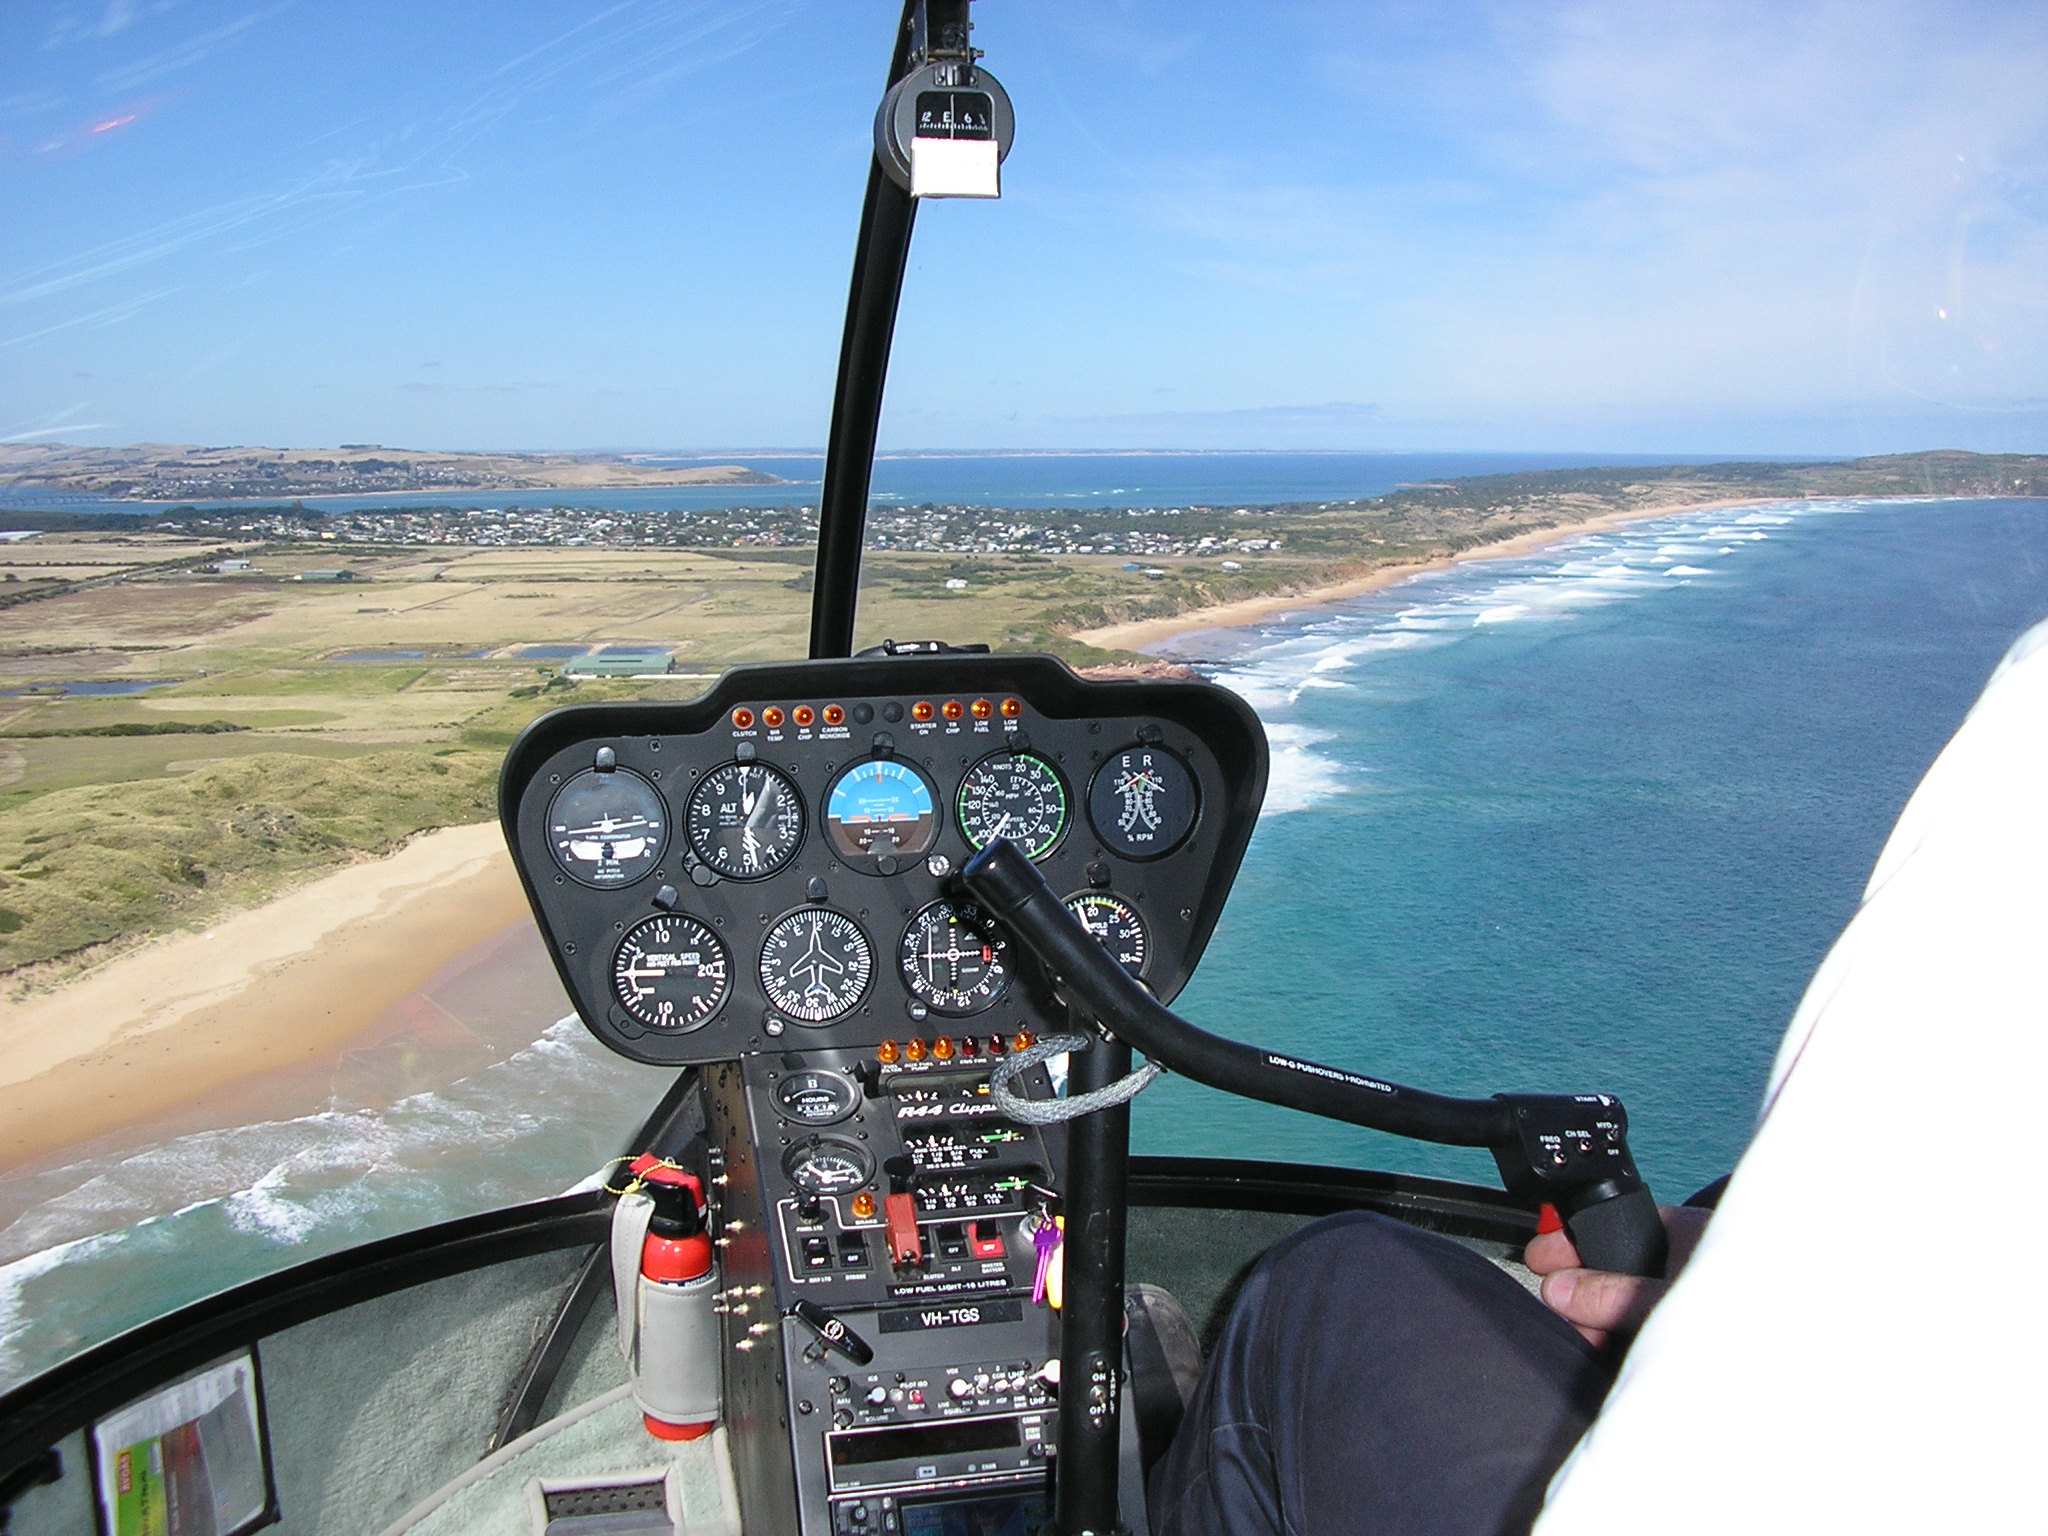 phillip island helicopter tour